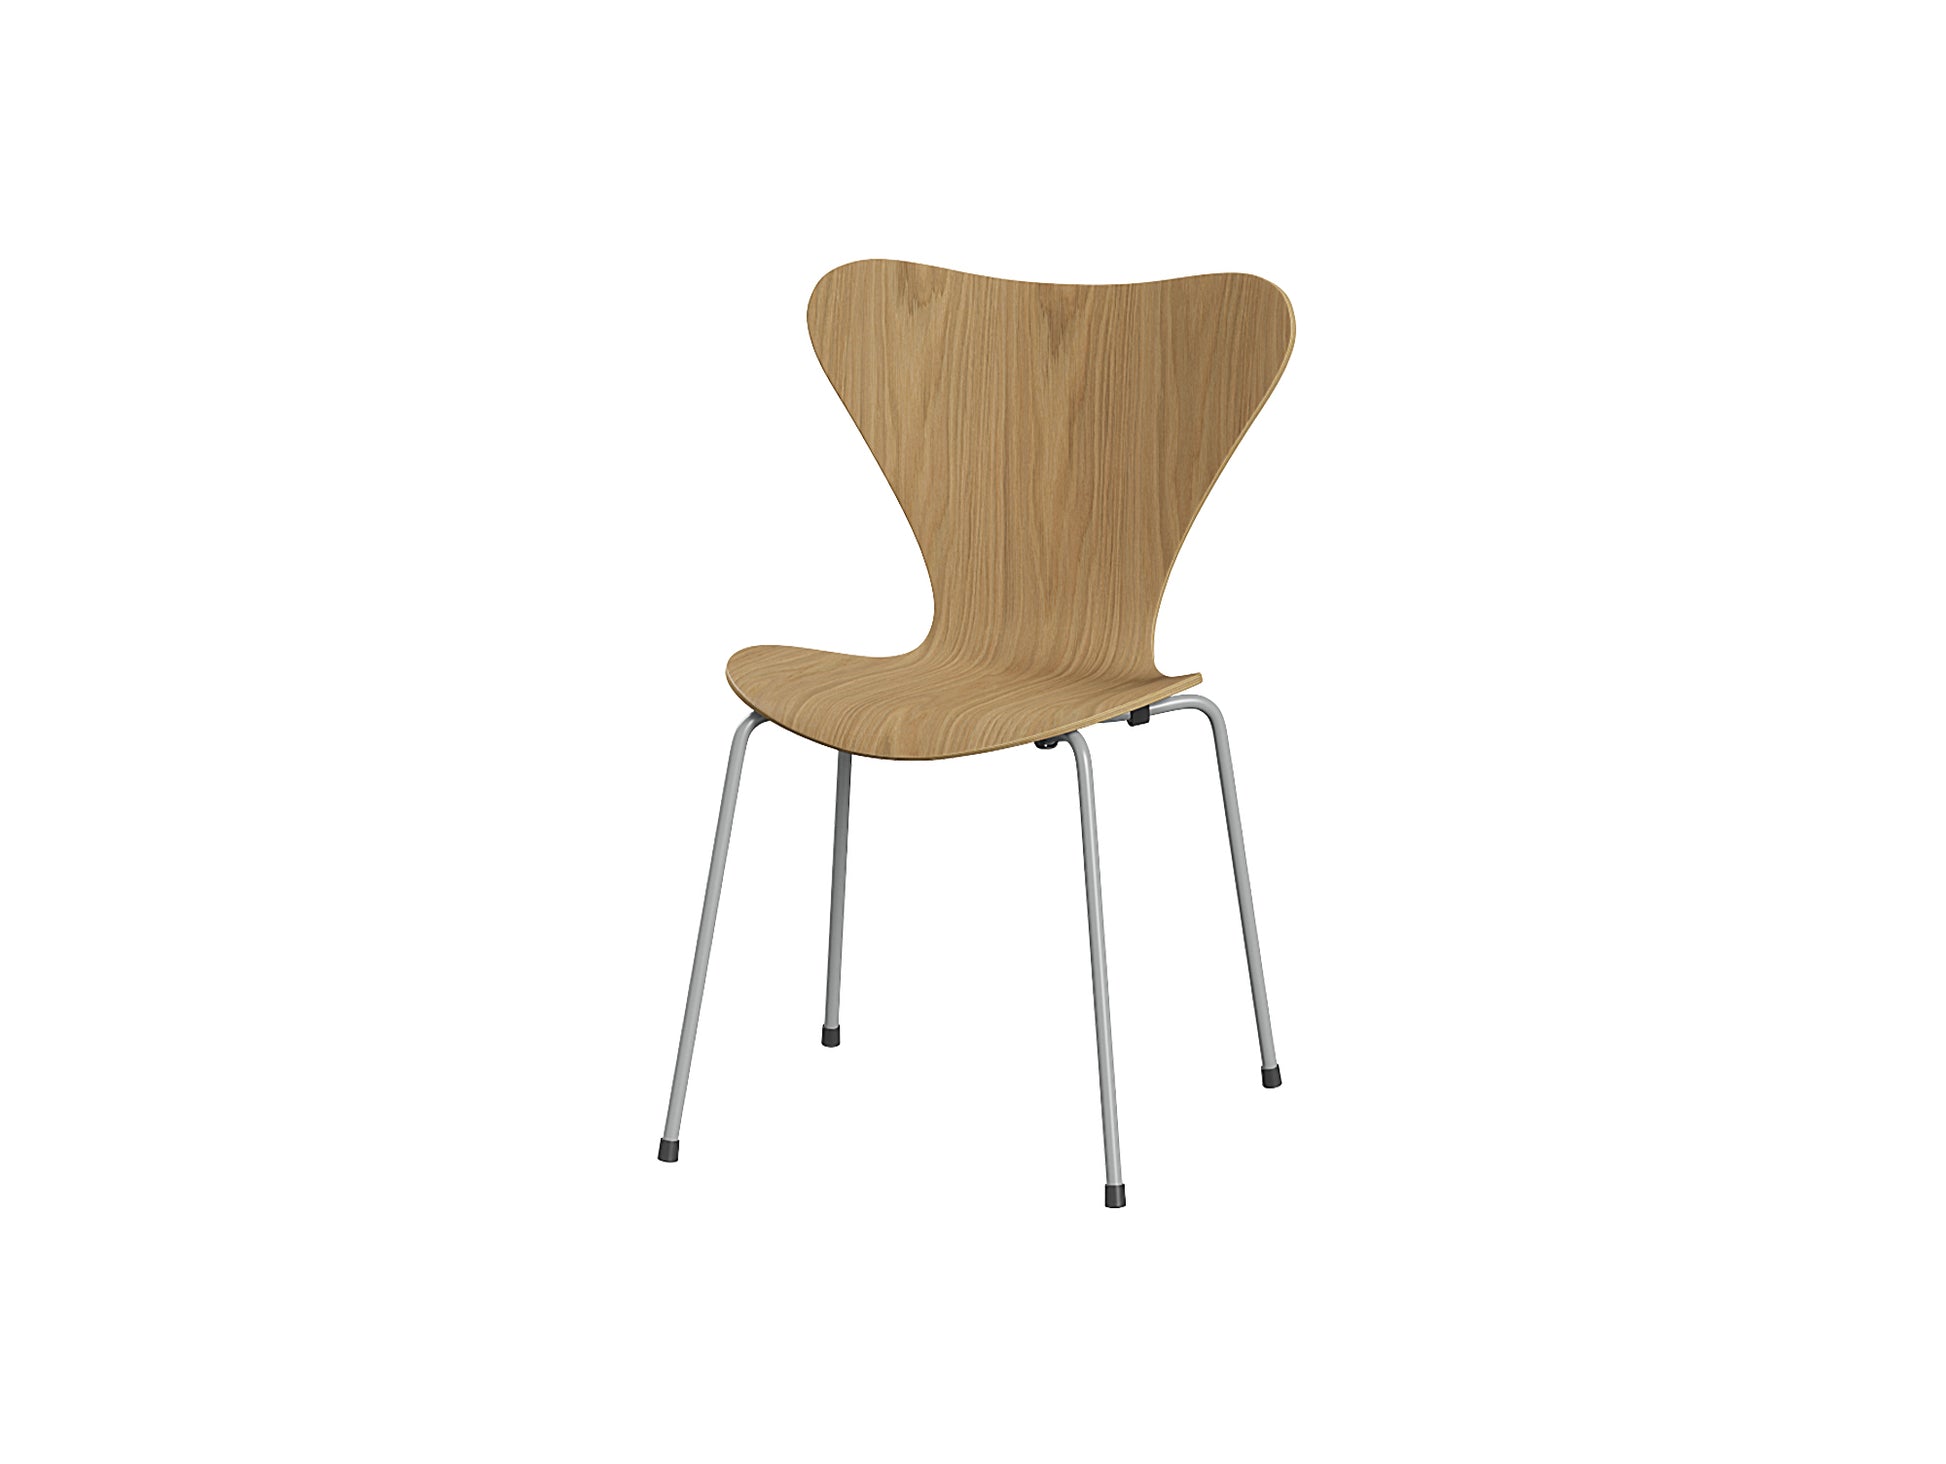 Series 7 Dining Chair (Clear Lacquered Wood) by Fritz Hanse - Oak / Nine Grey Steel